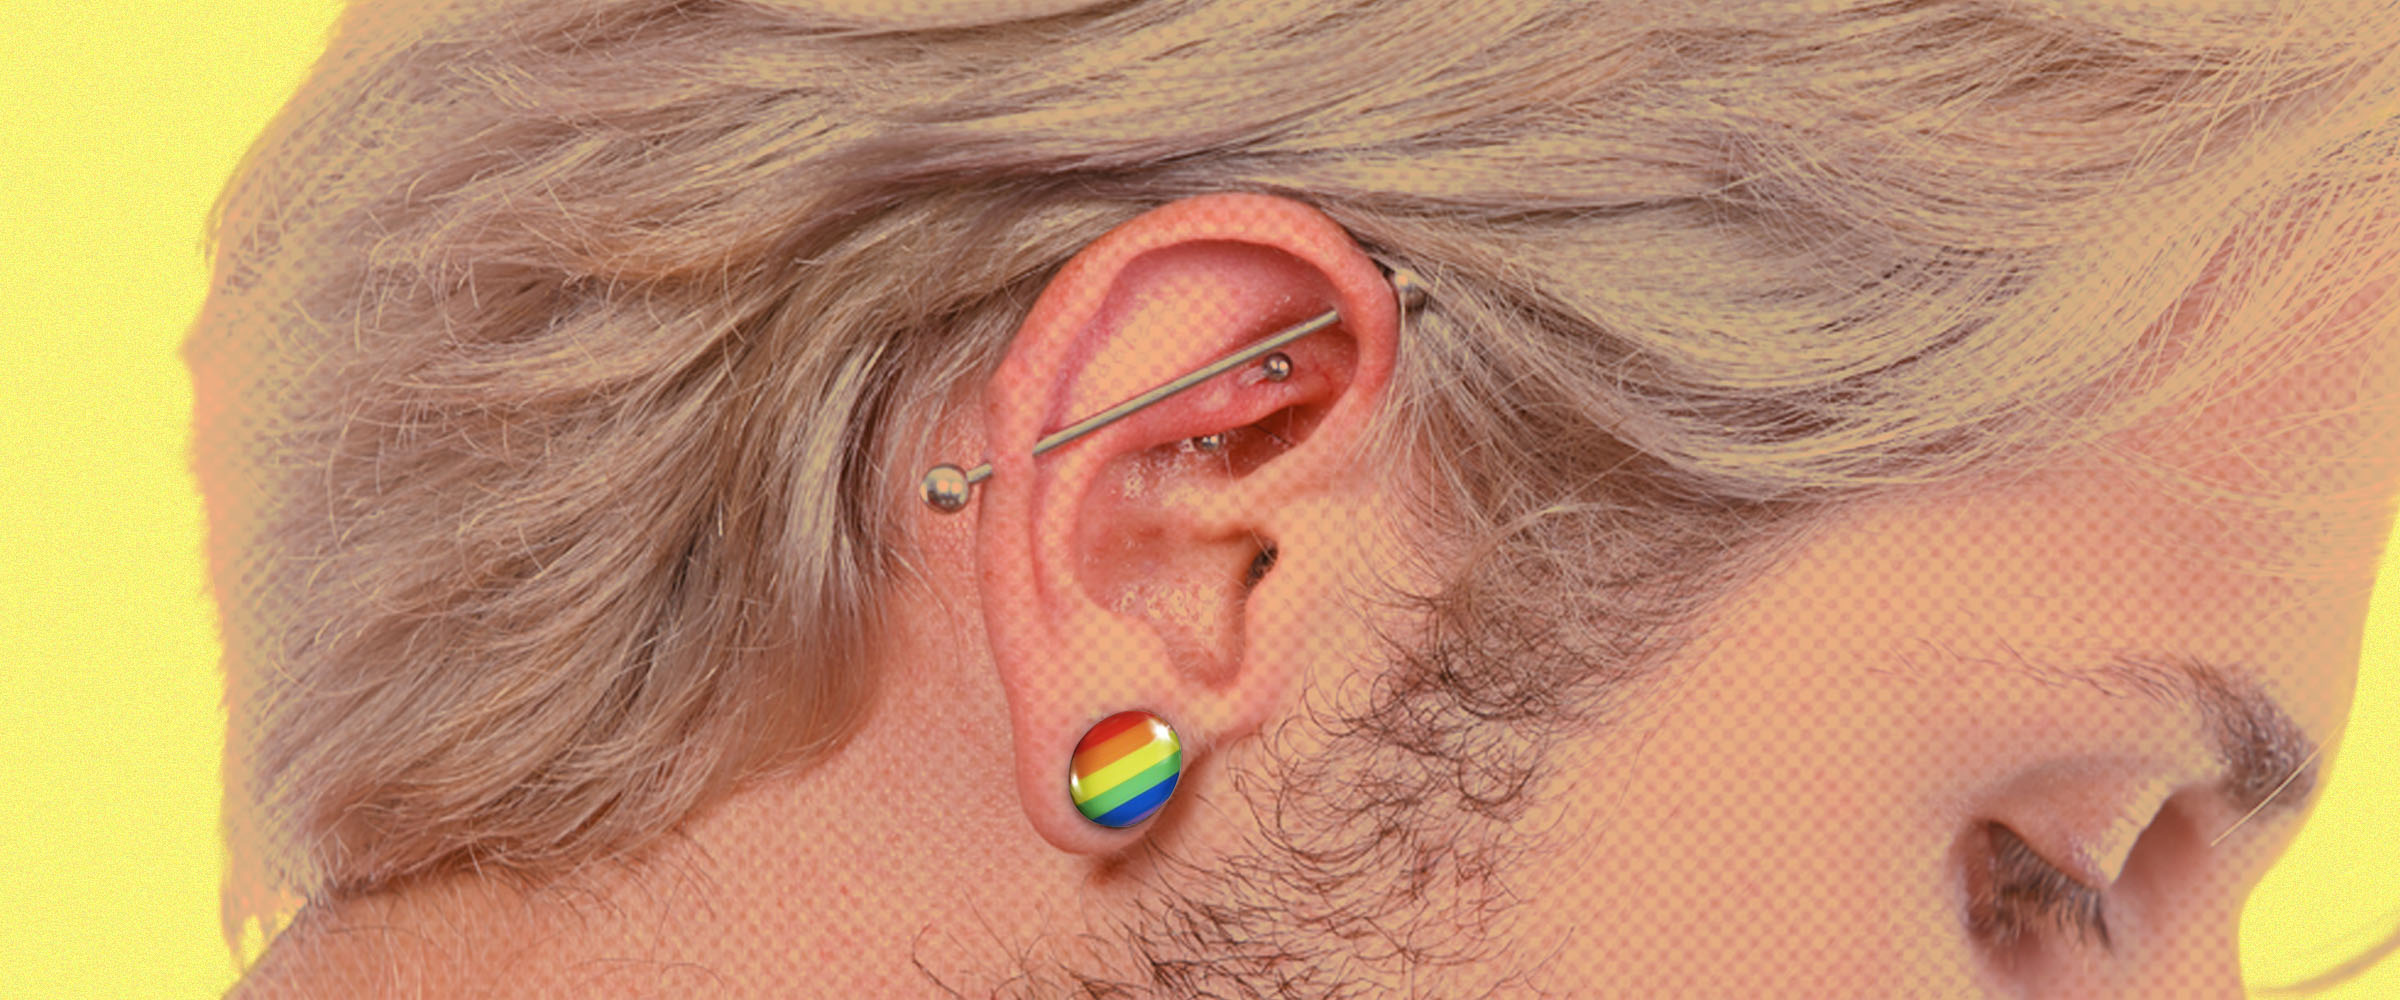 The for which gay earrings is side side The “Gay”